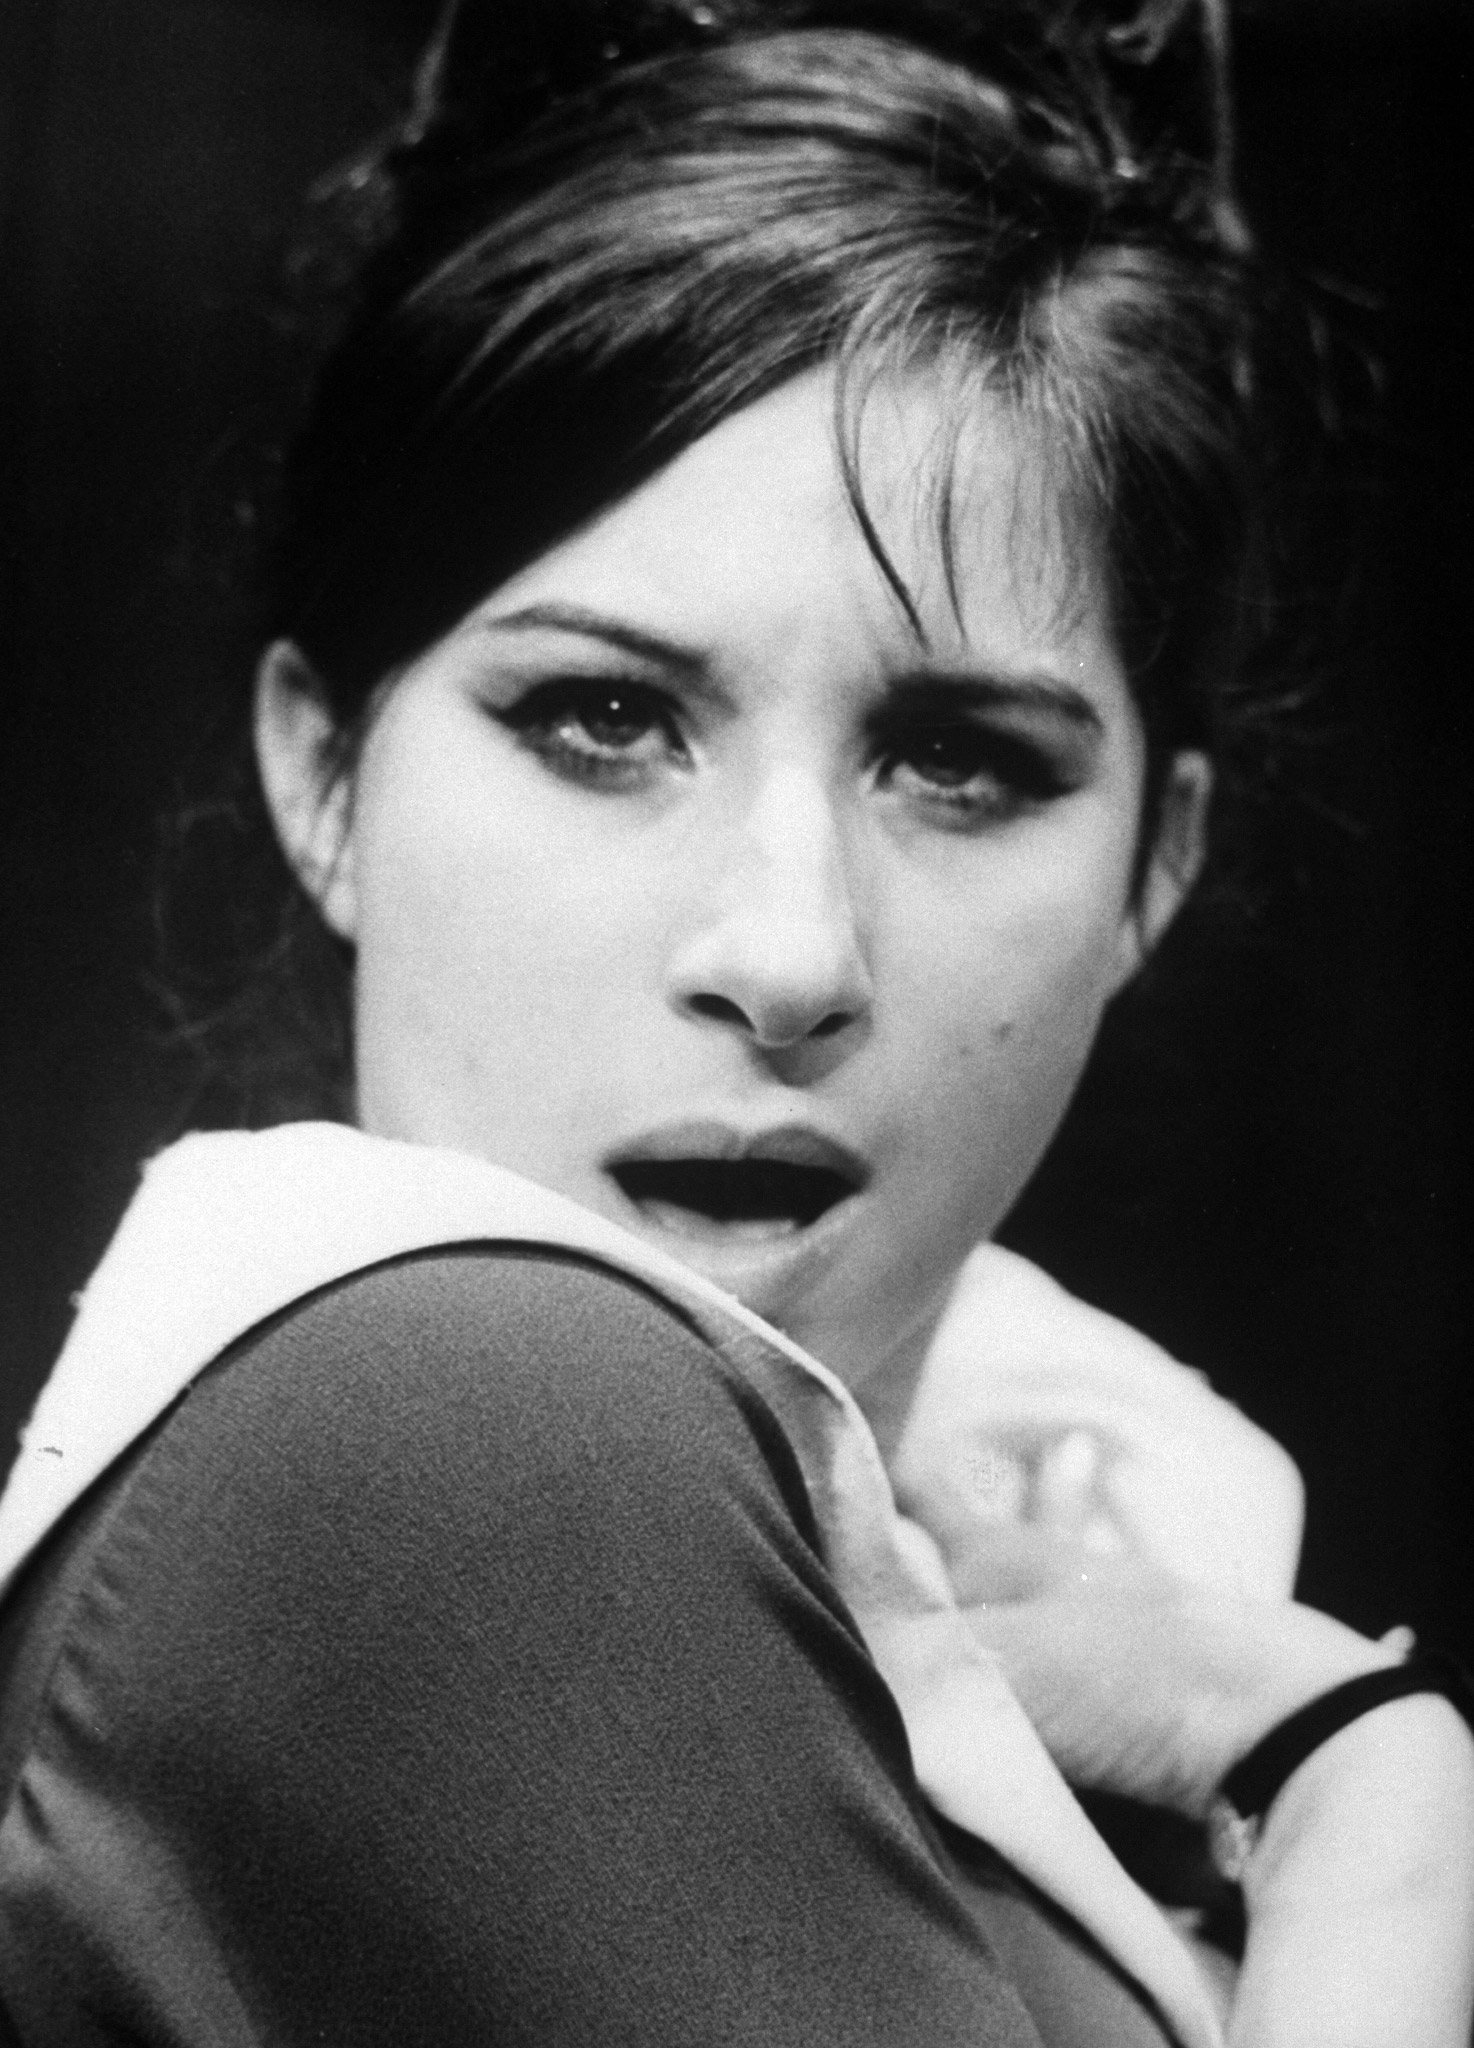 Barbra Streisand in the 1962 Broadway play I Can Get It For You Wholesale.